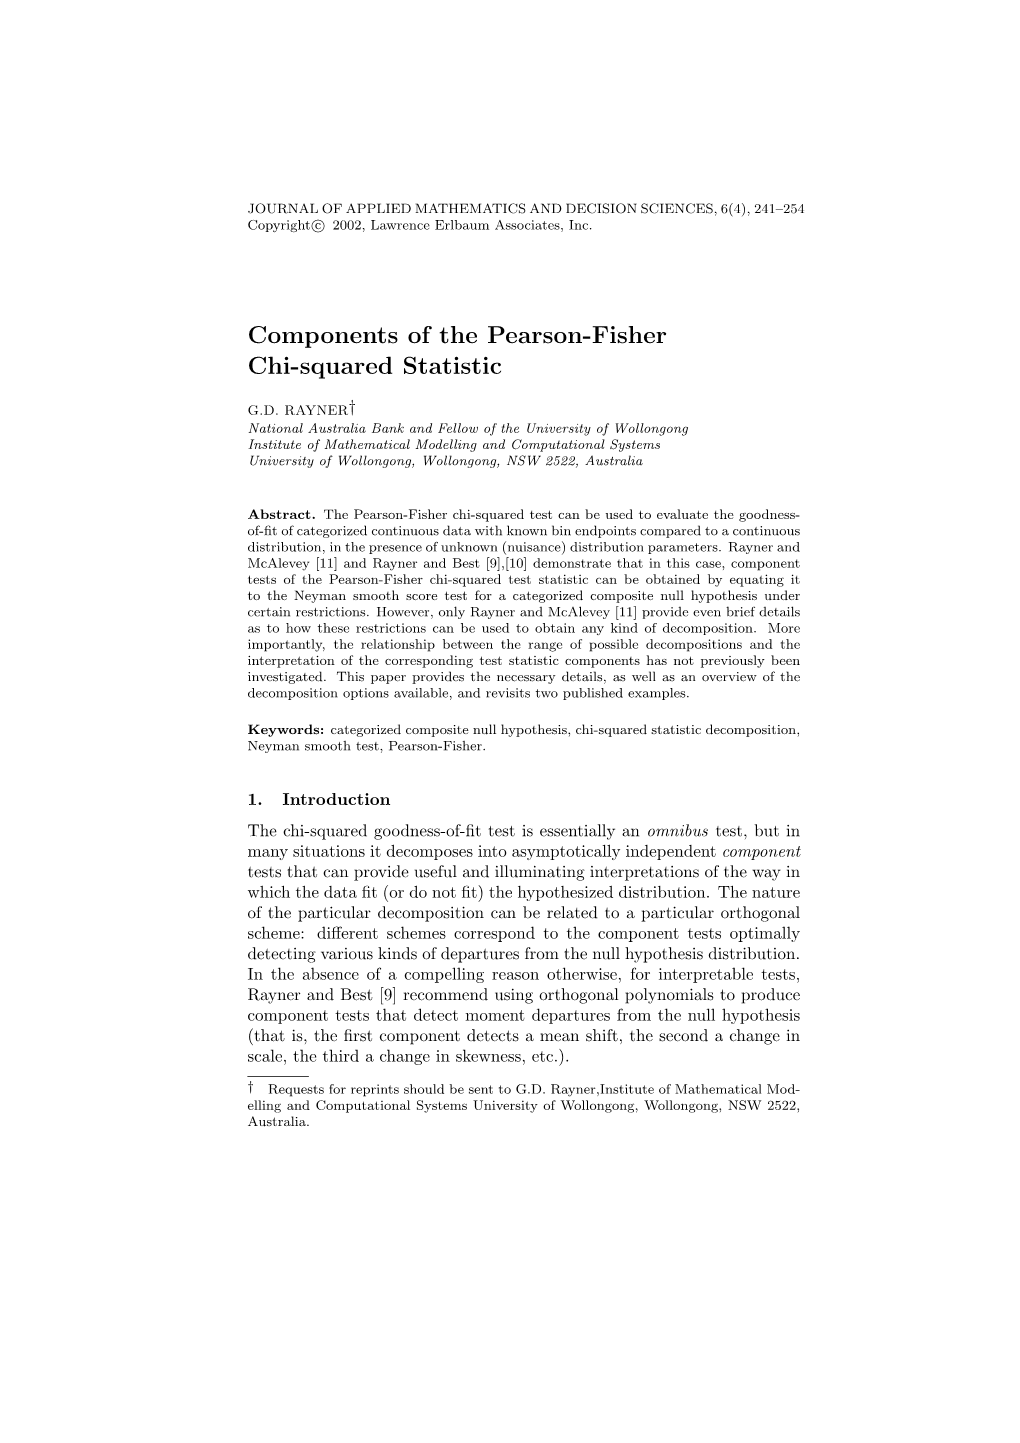 Components of the Pearson-Fisher Chi-Squared Statistic